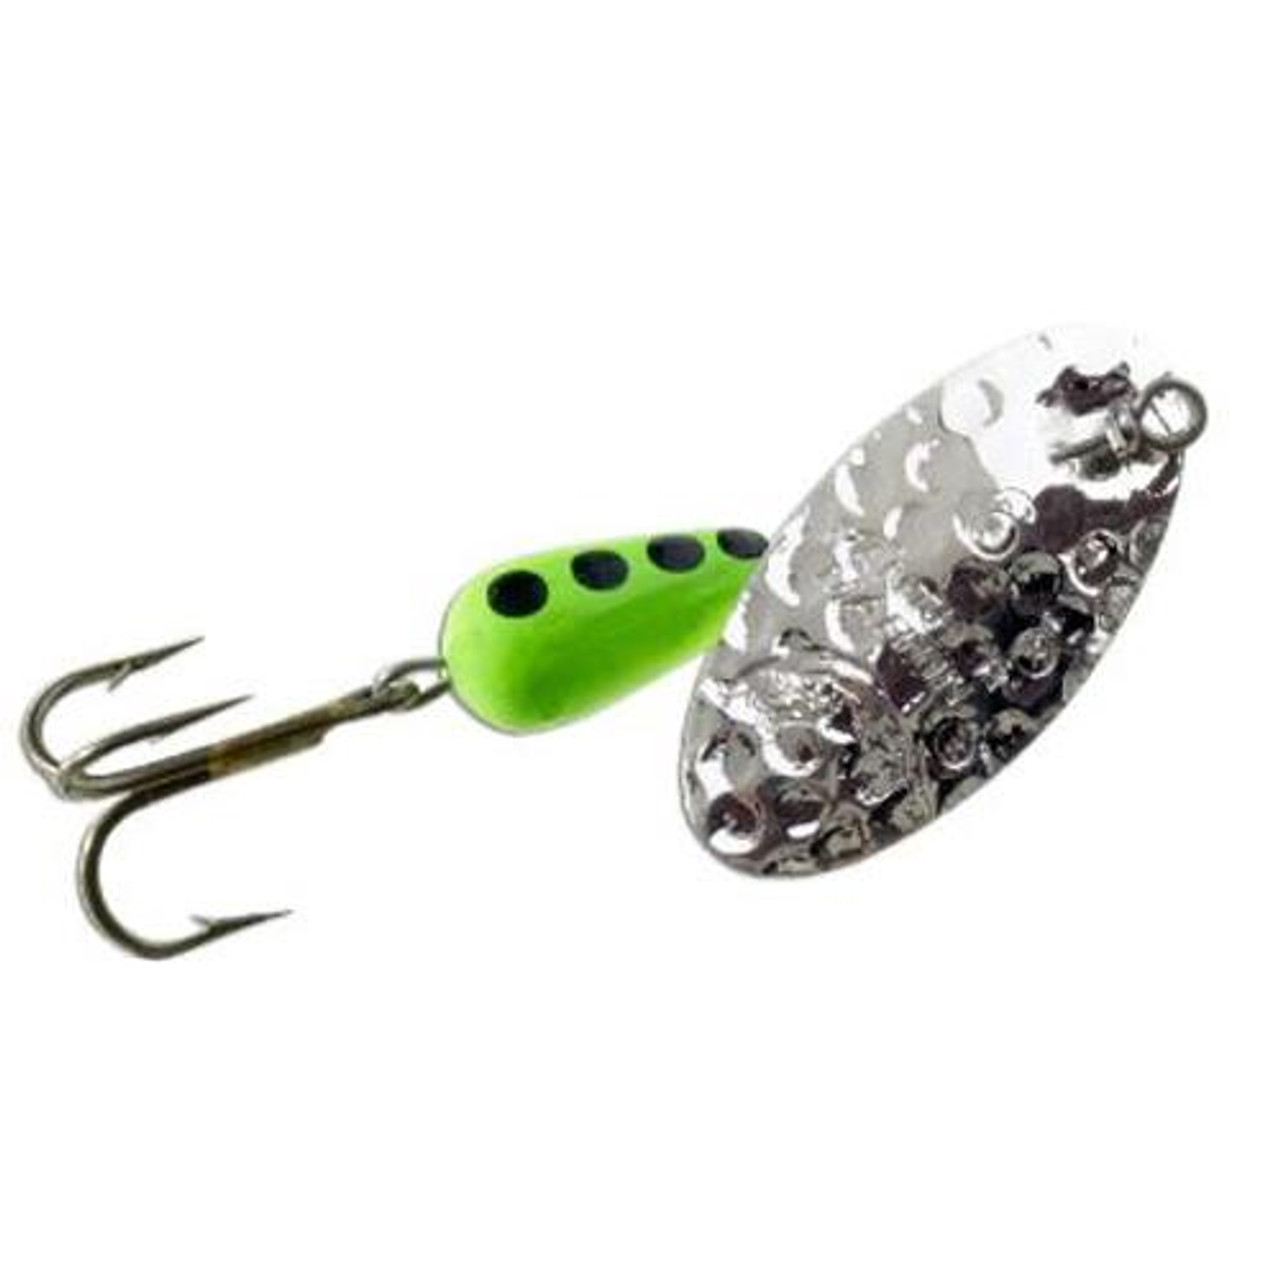 Sunfish catching lures from Panther Martin (31 colors)